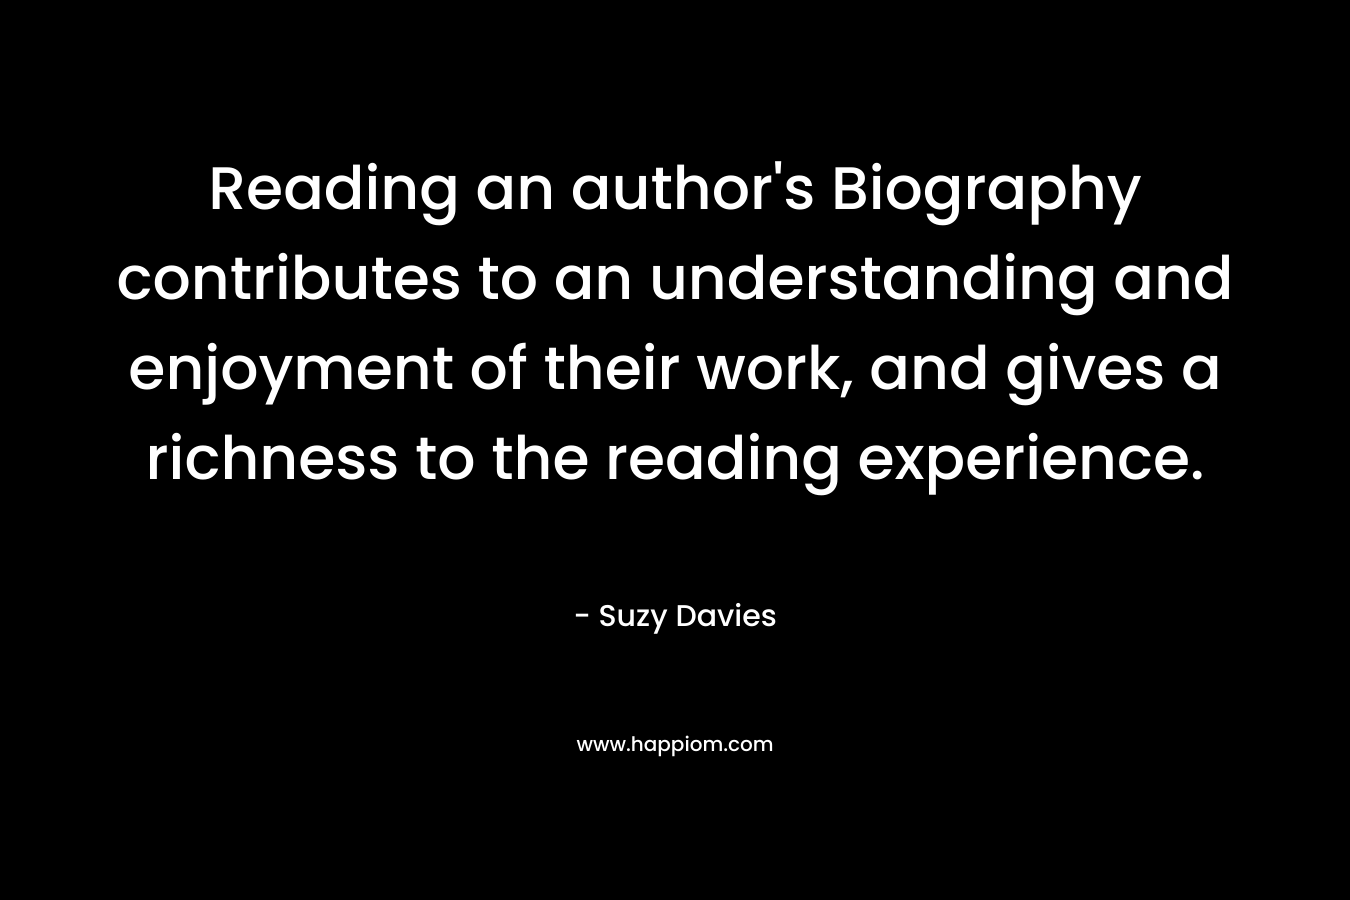 Reading an author's Biography contributes to an understanding and enjoyment of their work, and gives a richness to the reading experience.